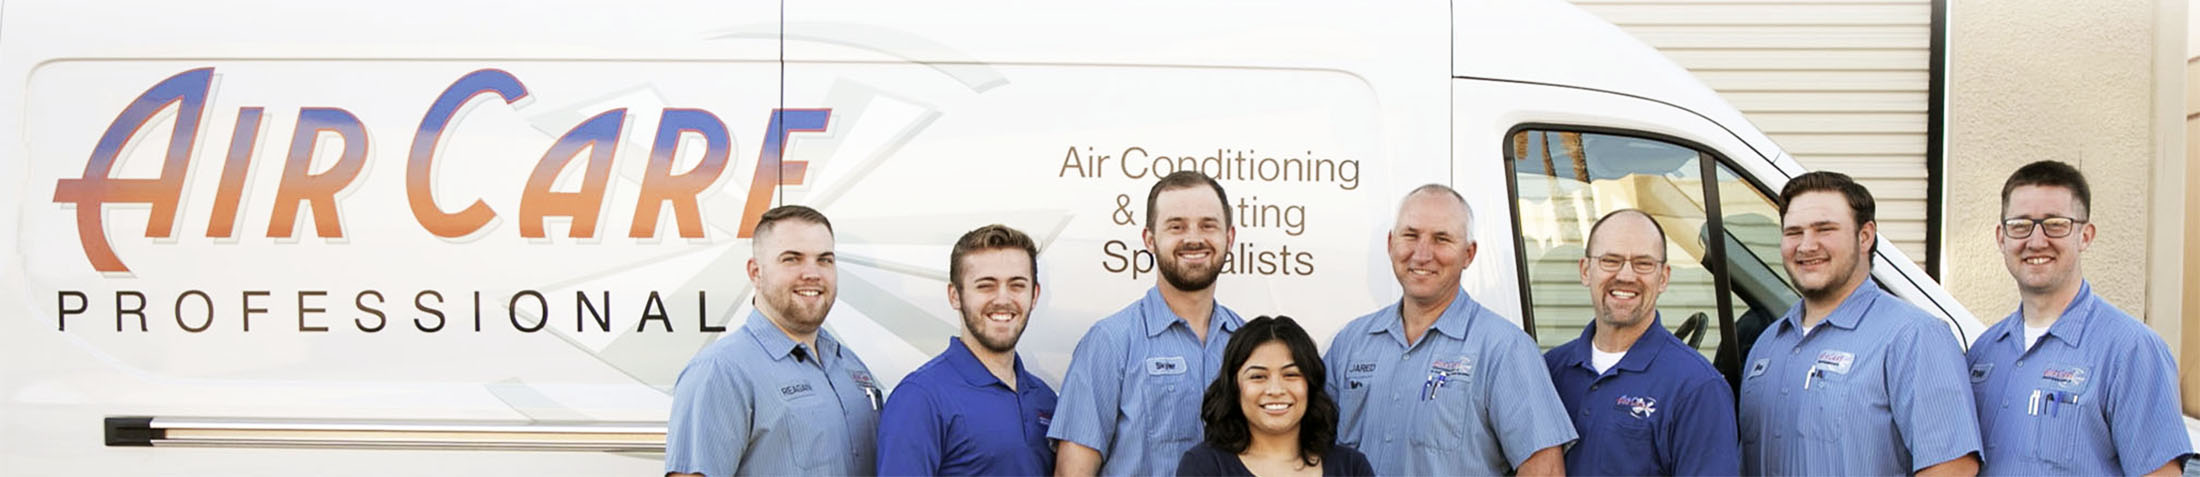 See what makes Air Care Professionals, LLC your number one choice for Heating repair in St. George UT.